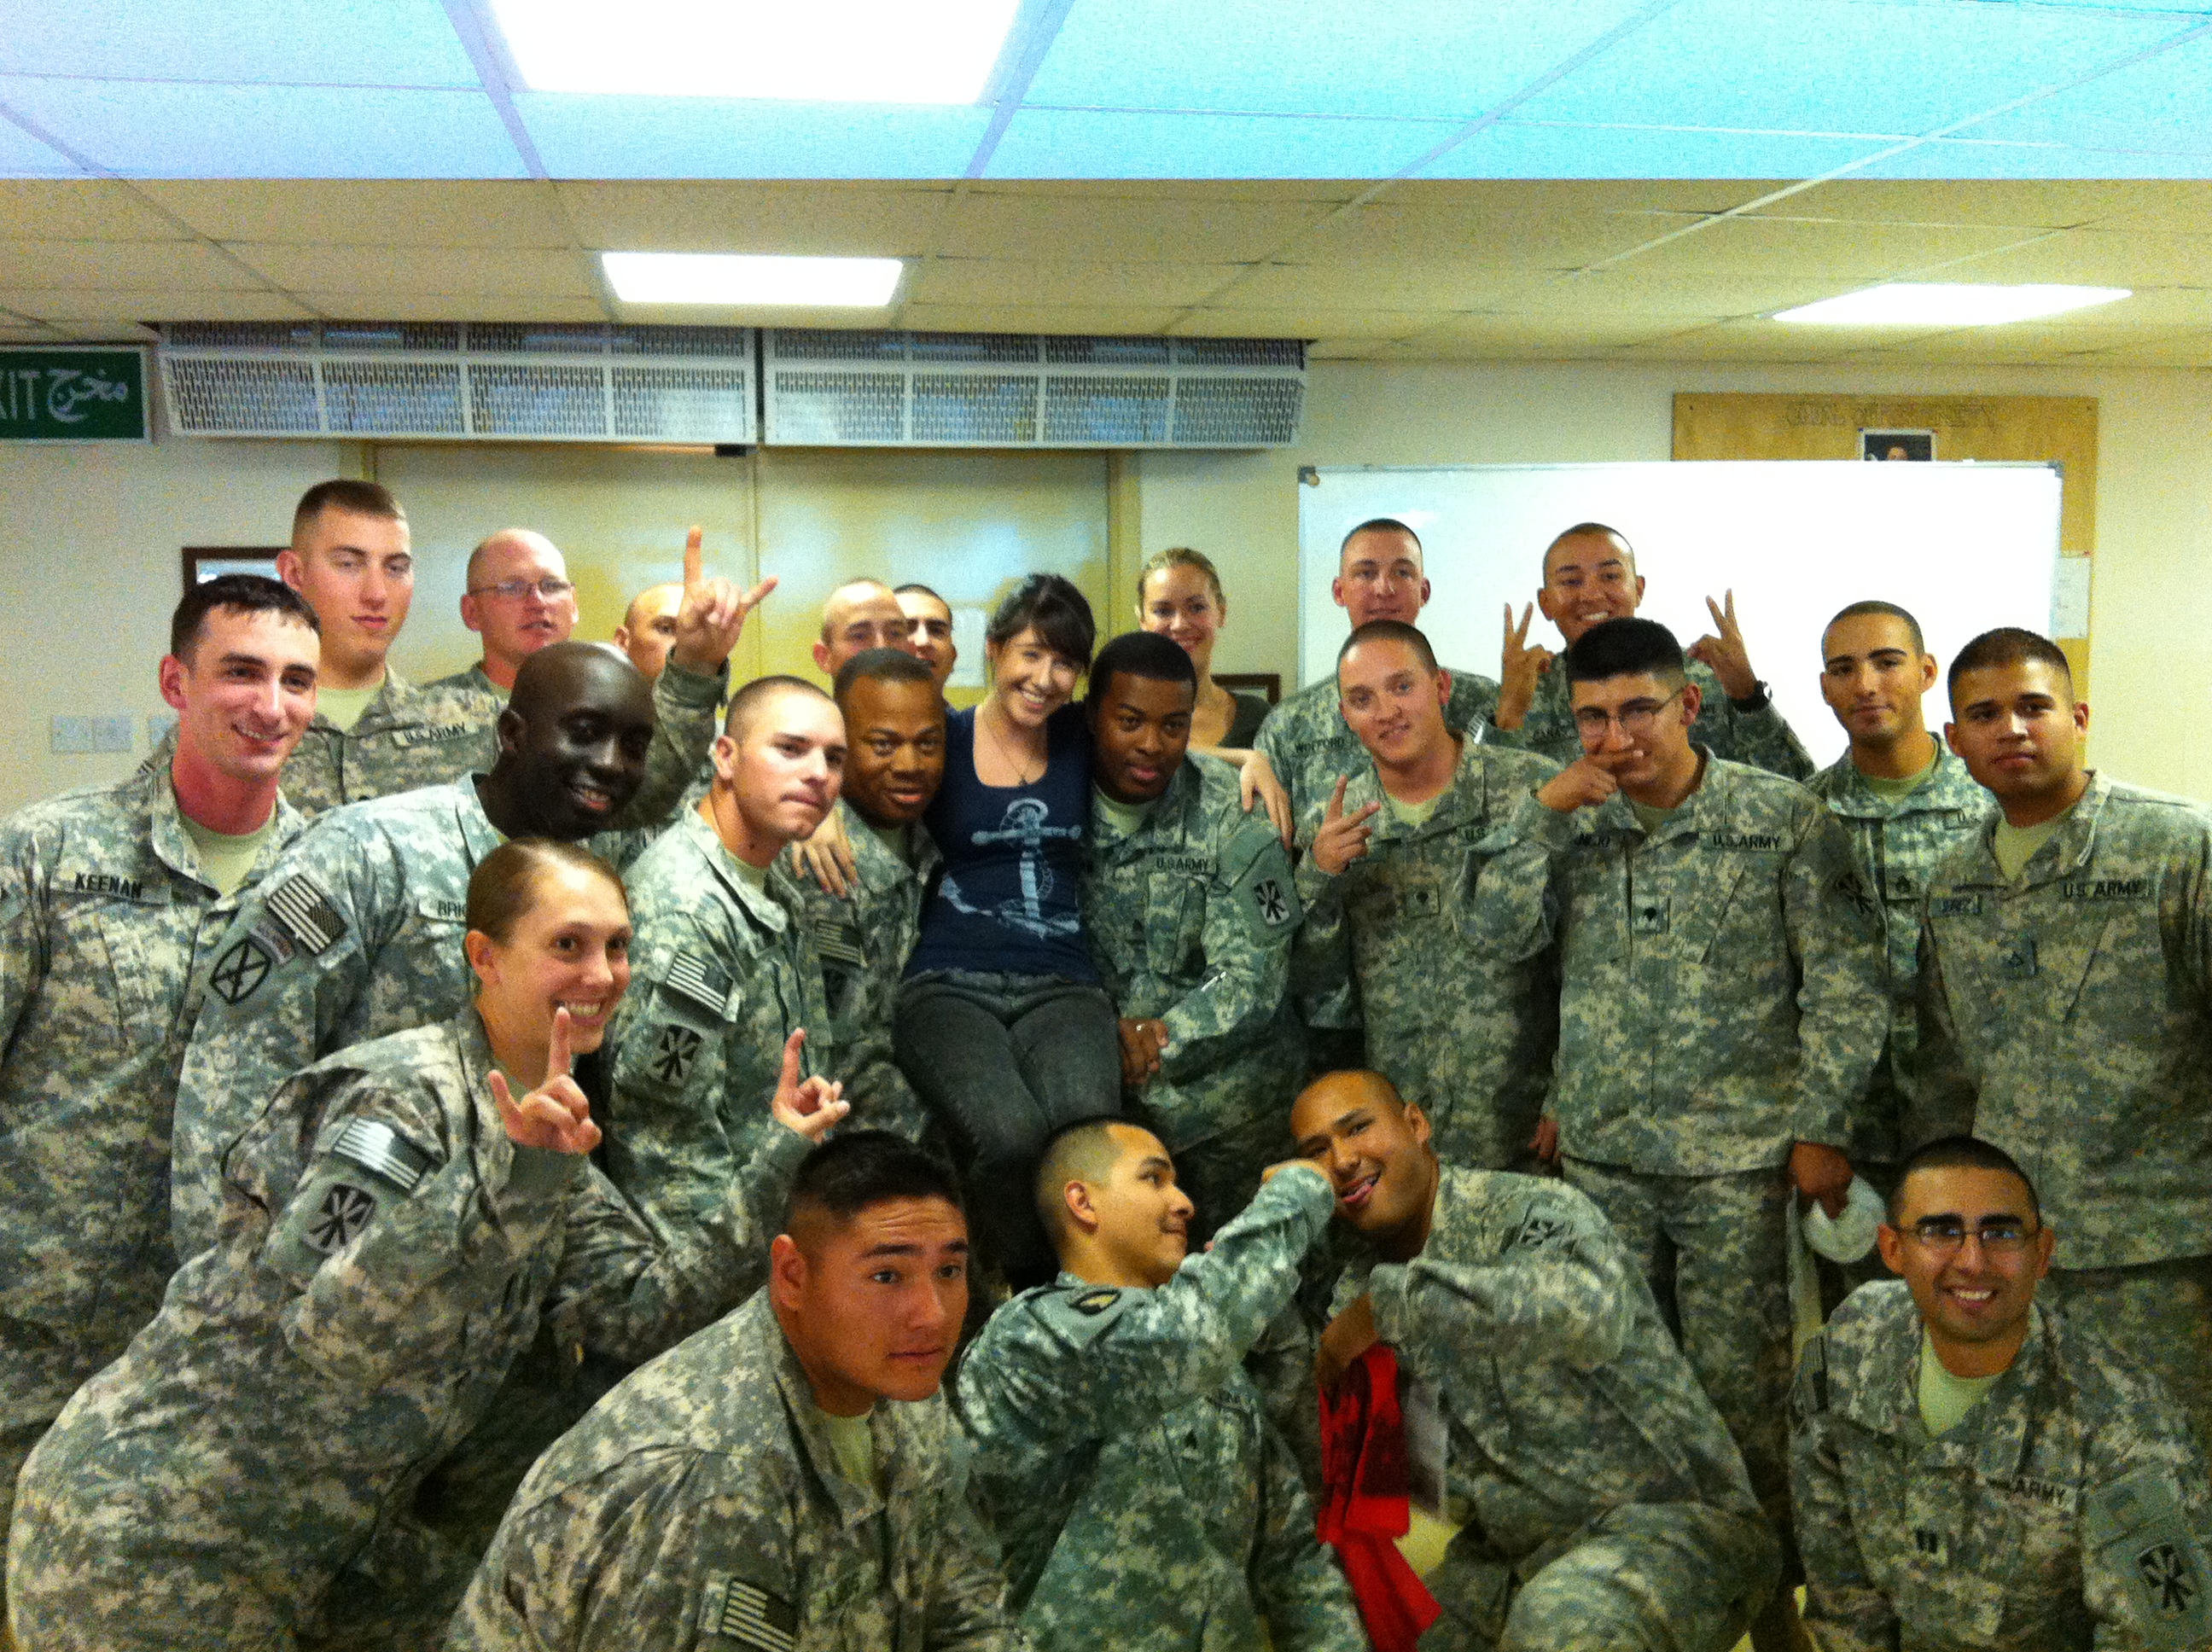 Cassidy Lehrman with the troops in Kuwait